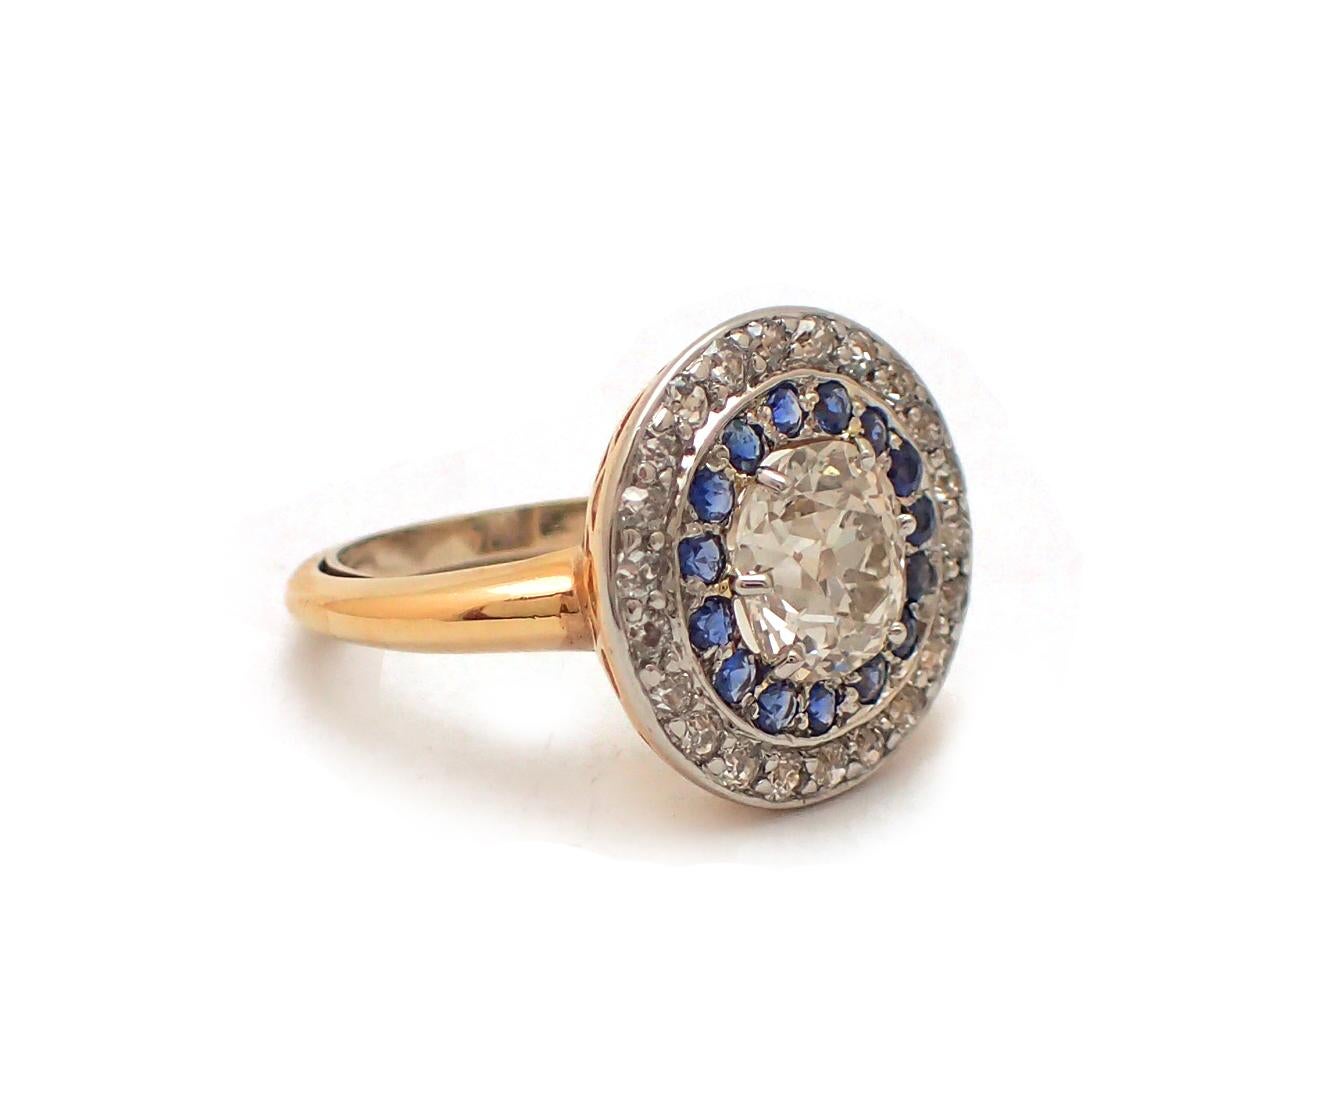 Explore history with this gorgeous Old Mine cut diamond ring featuring a 2.33ct center diamond, J-K Color, SI clarity. The center stone is surrounded by a double halo containing one circle of vivid blue sapphires, and one with white round single-cut